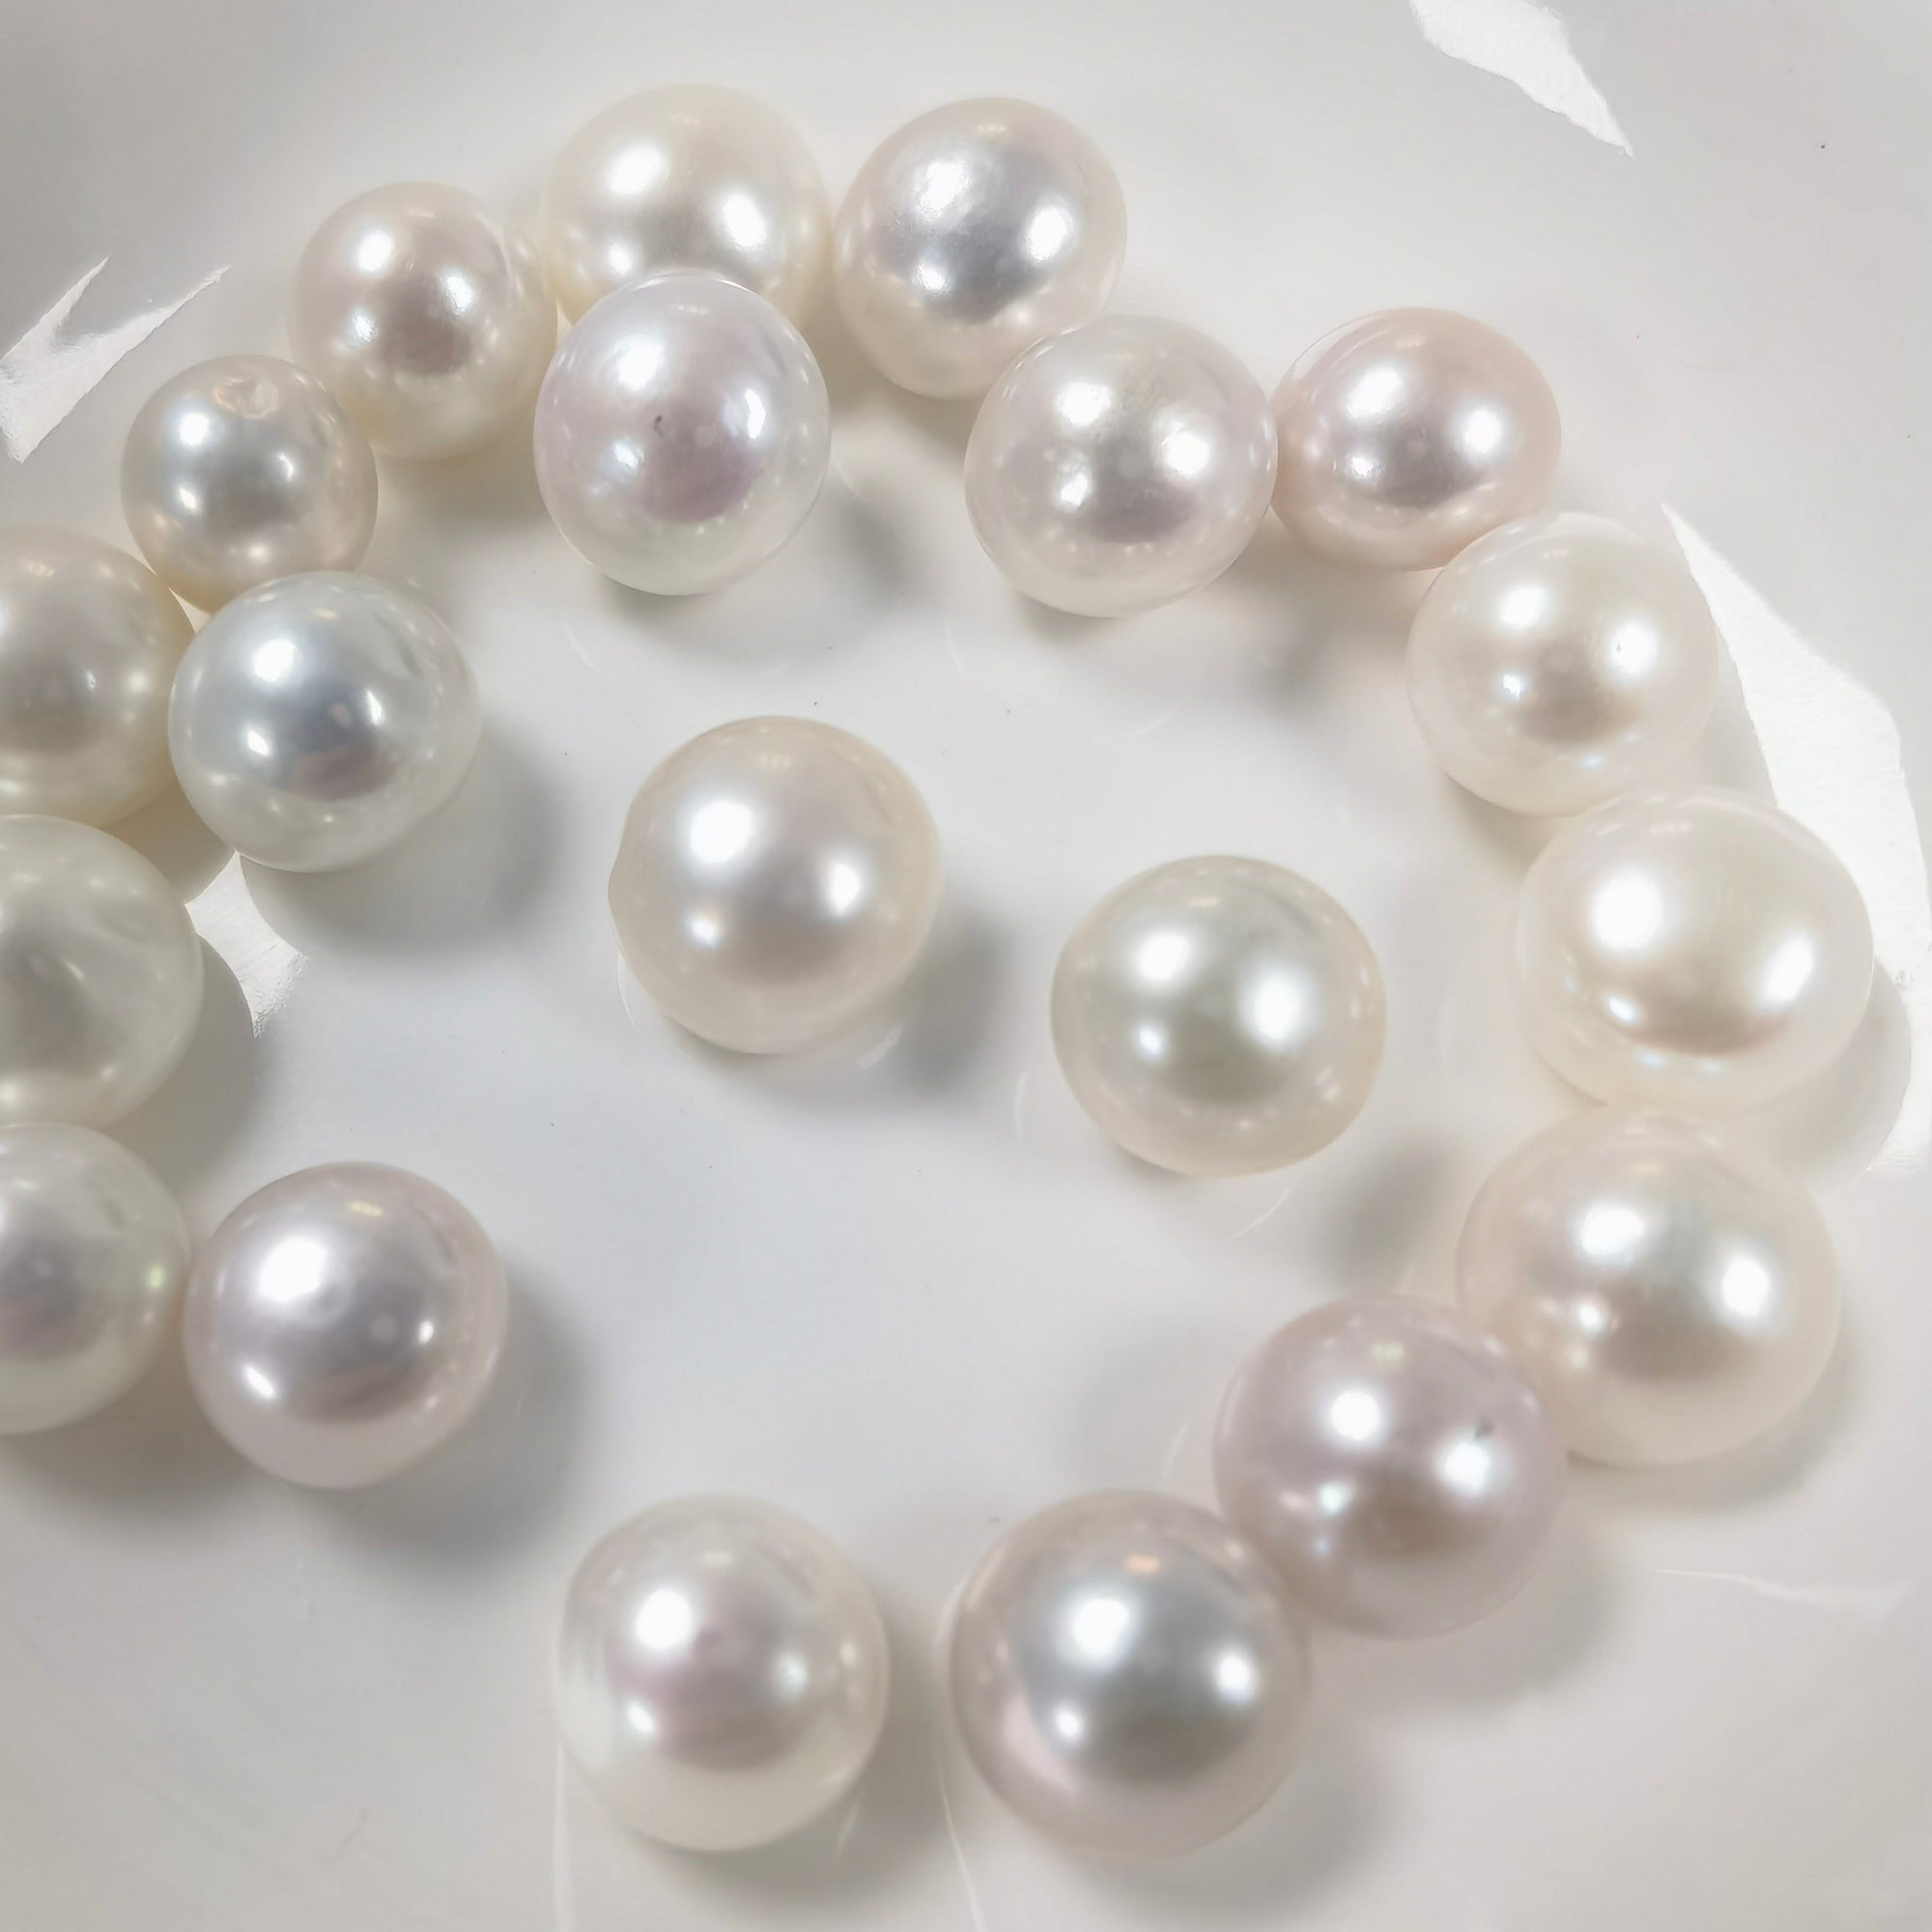 5A 1pc 11-12mm button pearl, white loose freshwater pearl beads